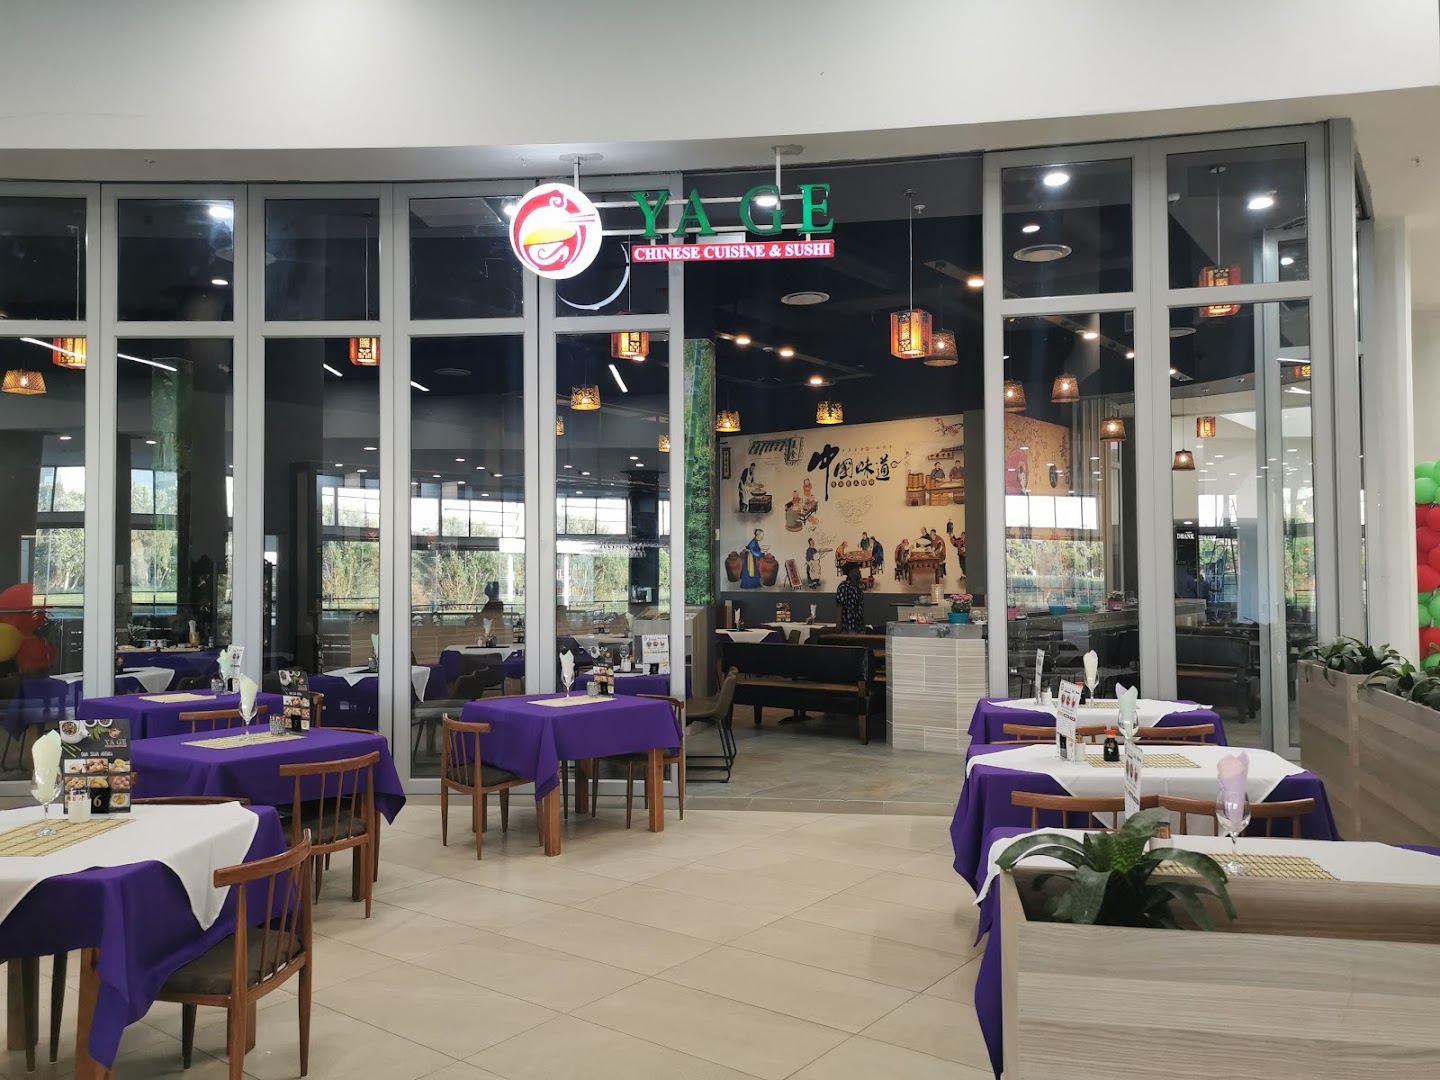 Yage Chinese Restaurant and Sushi – Centurion Mall